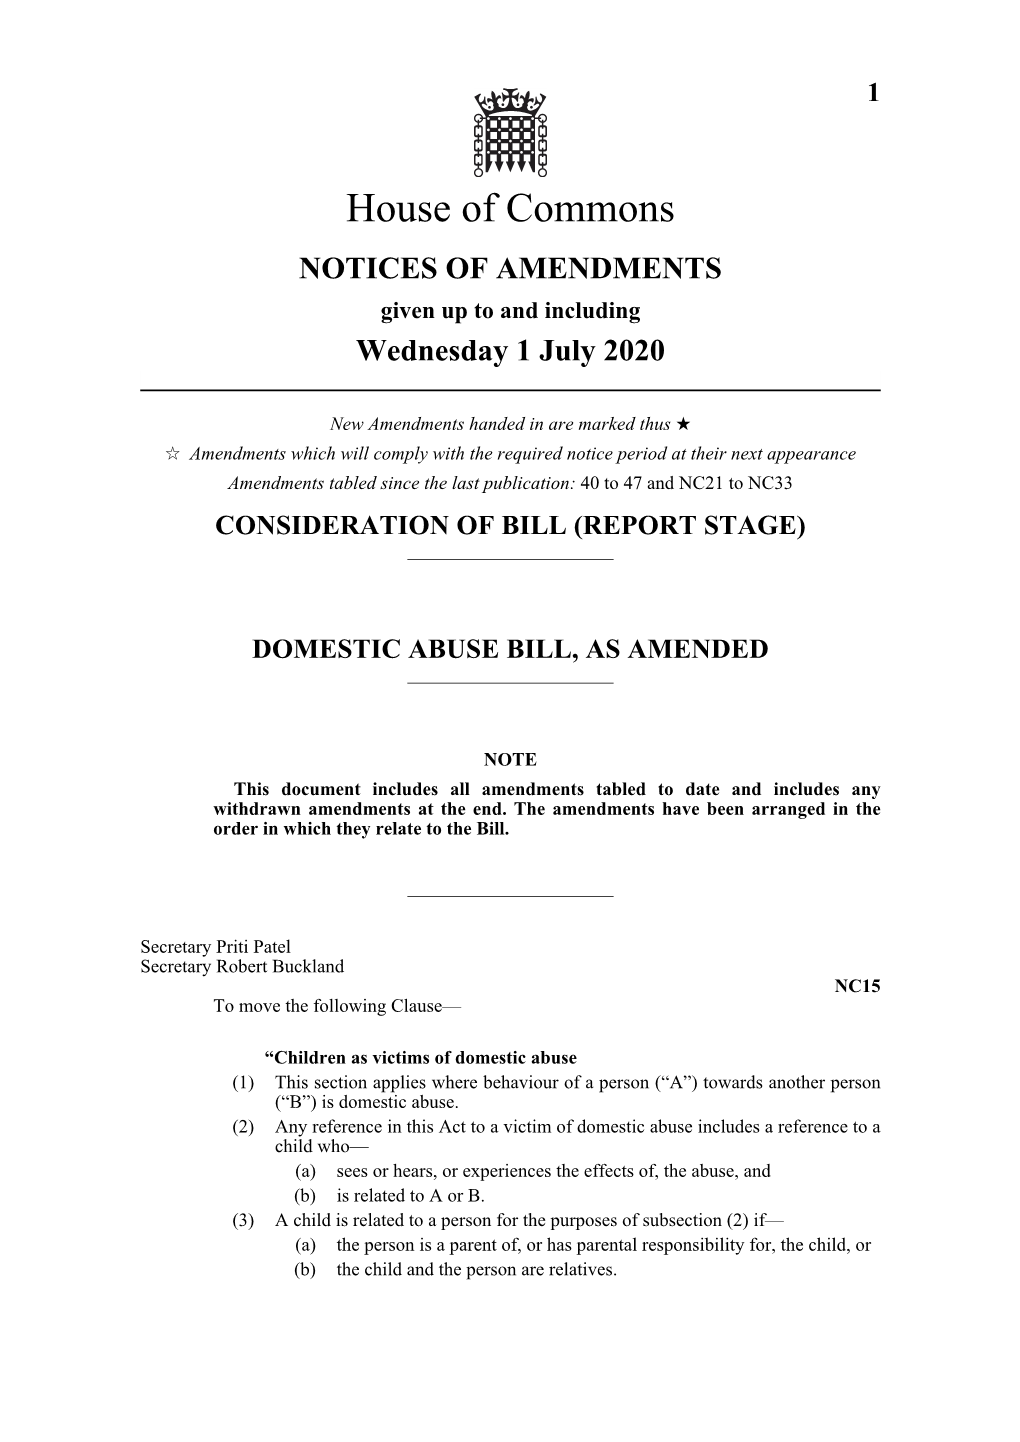 AMENDMENTS Given up to and Including Wednesday 1 July 2020